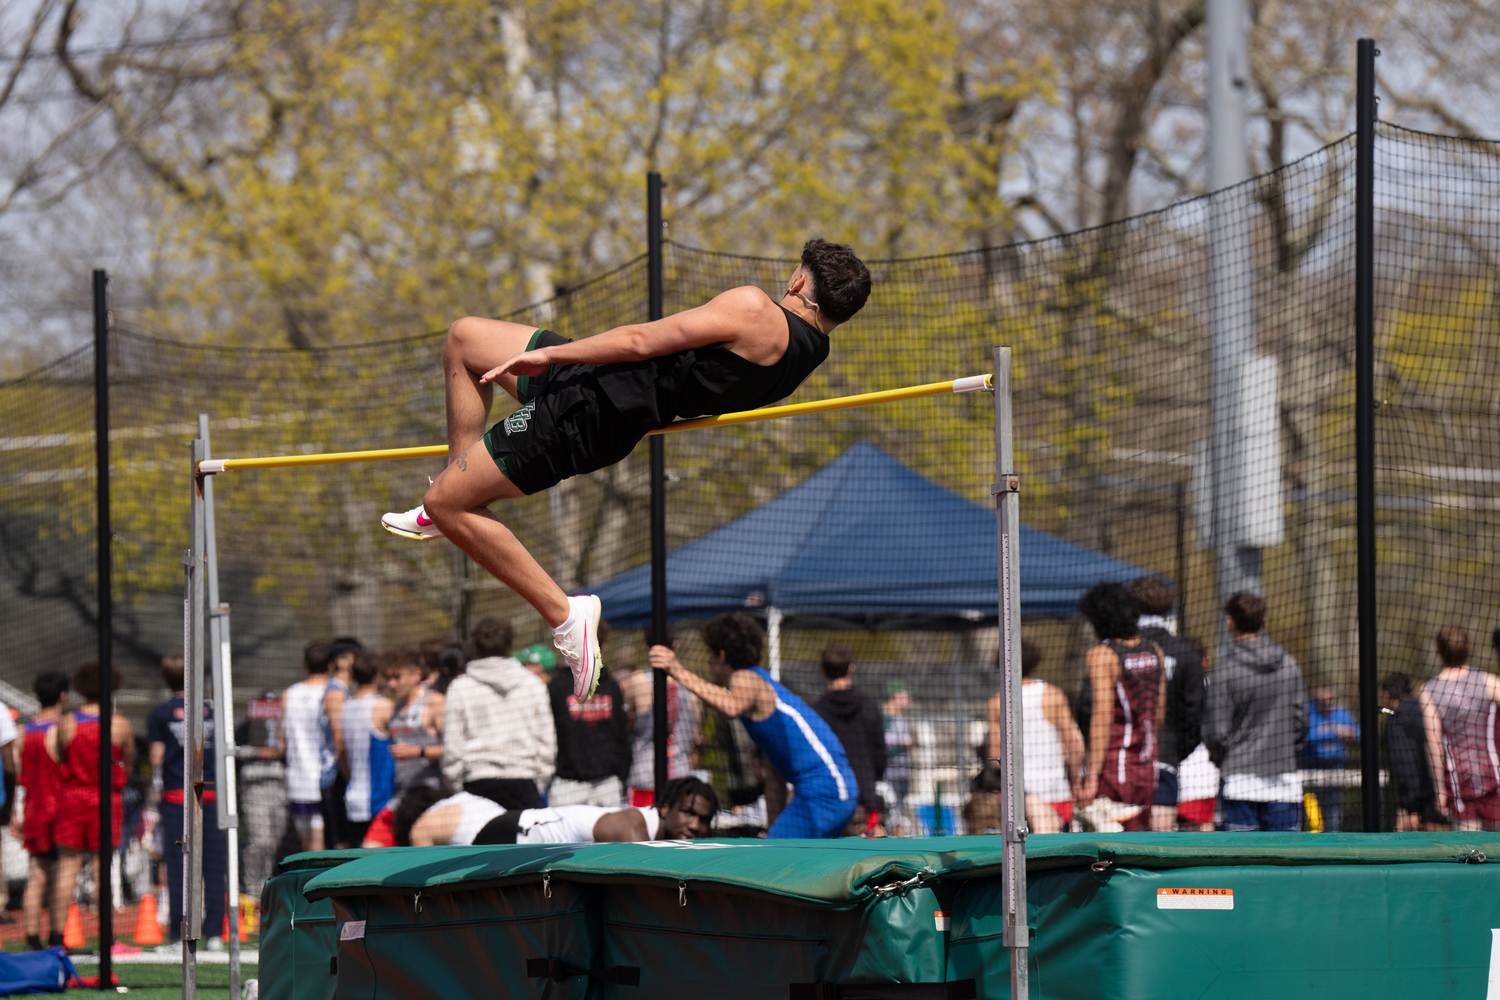 Westhampton Beach senior Michael LoRusso competing in the high jump at his school's invitational on Saturday. RON ESPOSITO